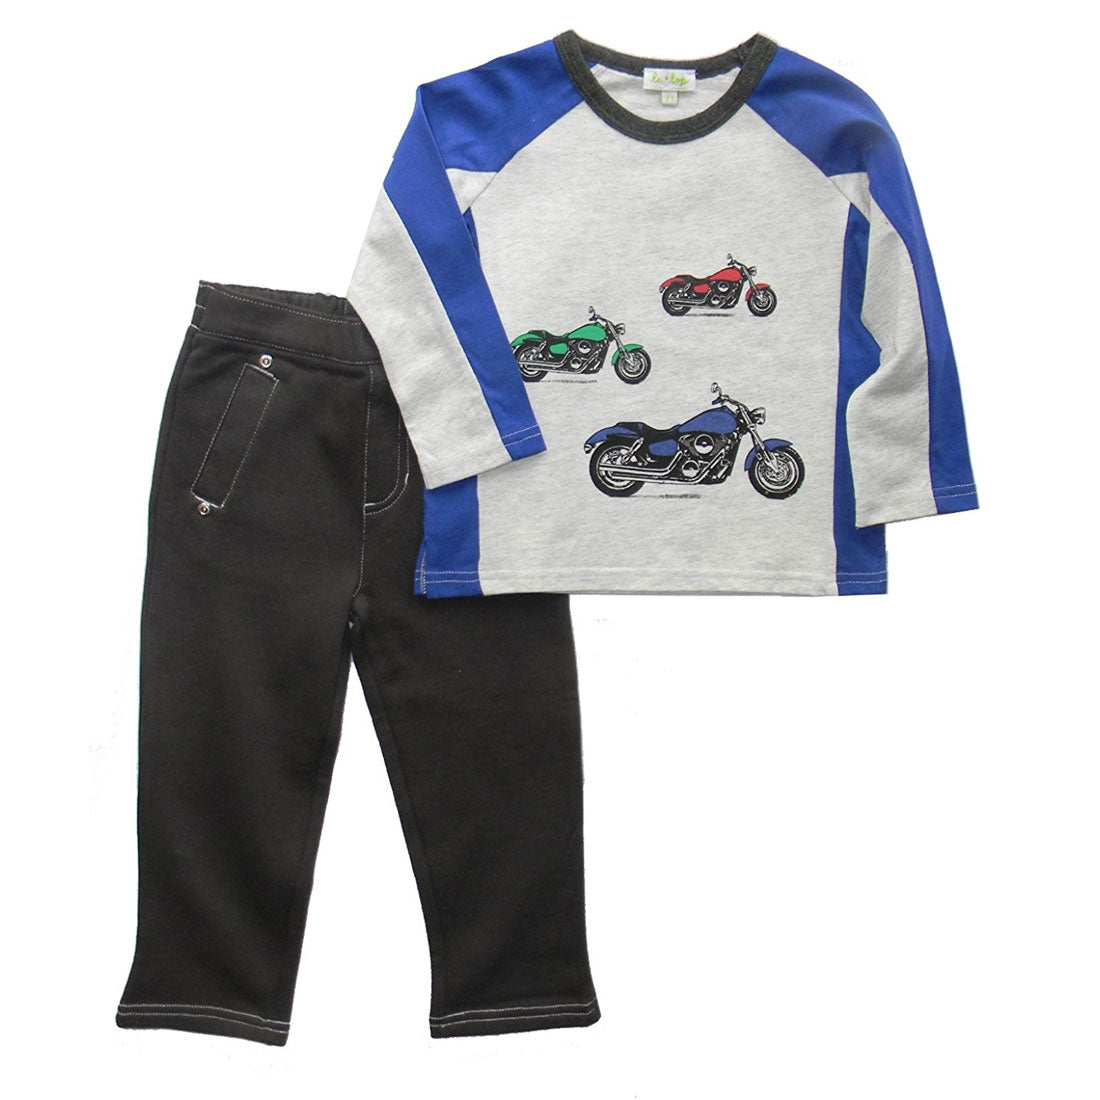 Boy's Motorcycle Trio Shirt and Pant Set by le top